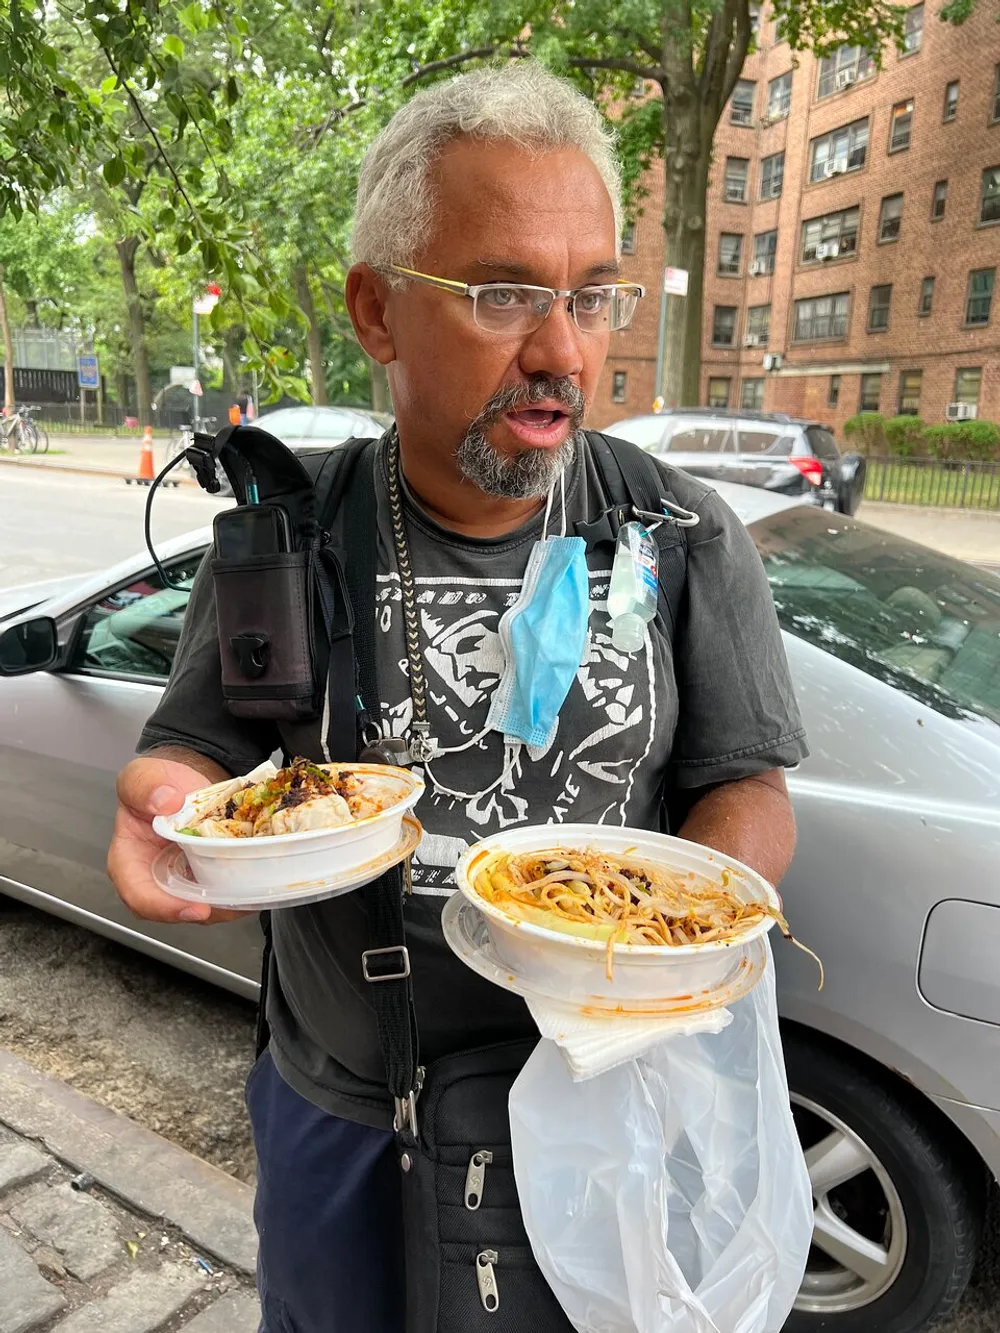 A man with glasses and a face mask dangling from his ear looks surprised while holding two plates of food outdoors